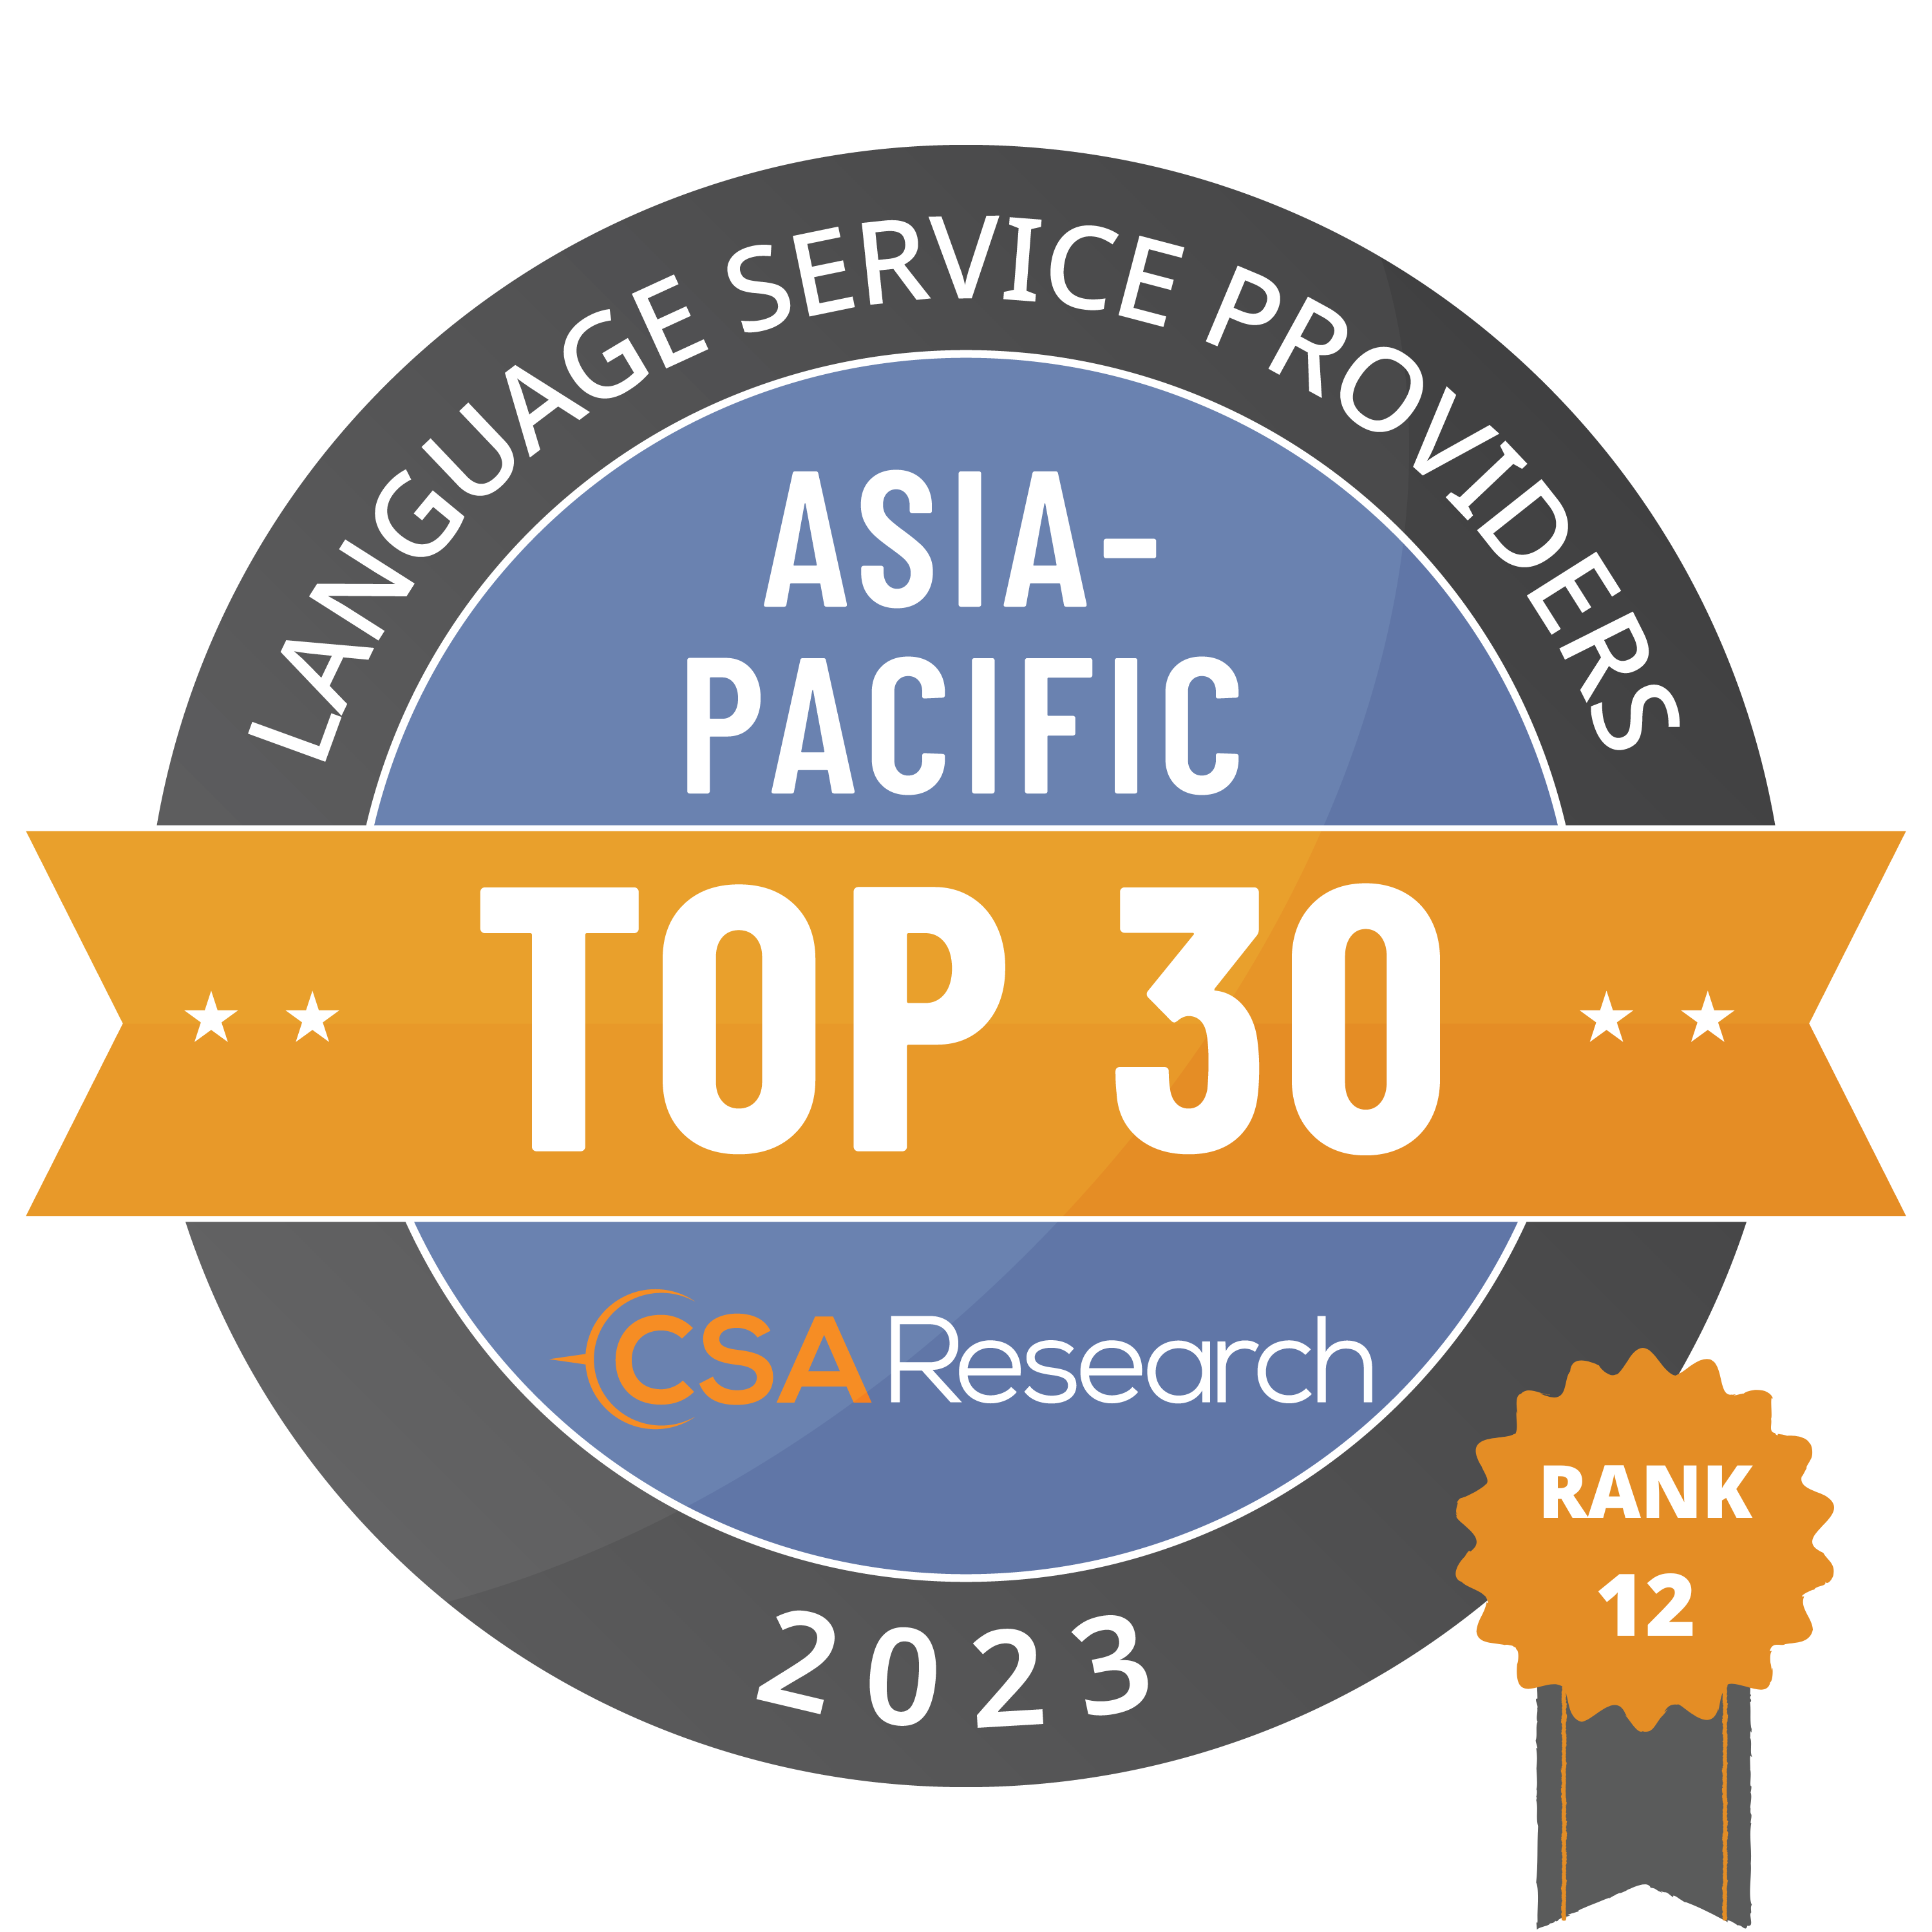 CSA Research Badge Top 30 Asia Pacific Rank 12